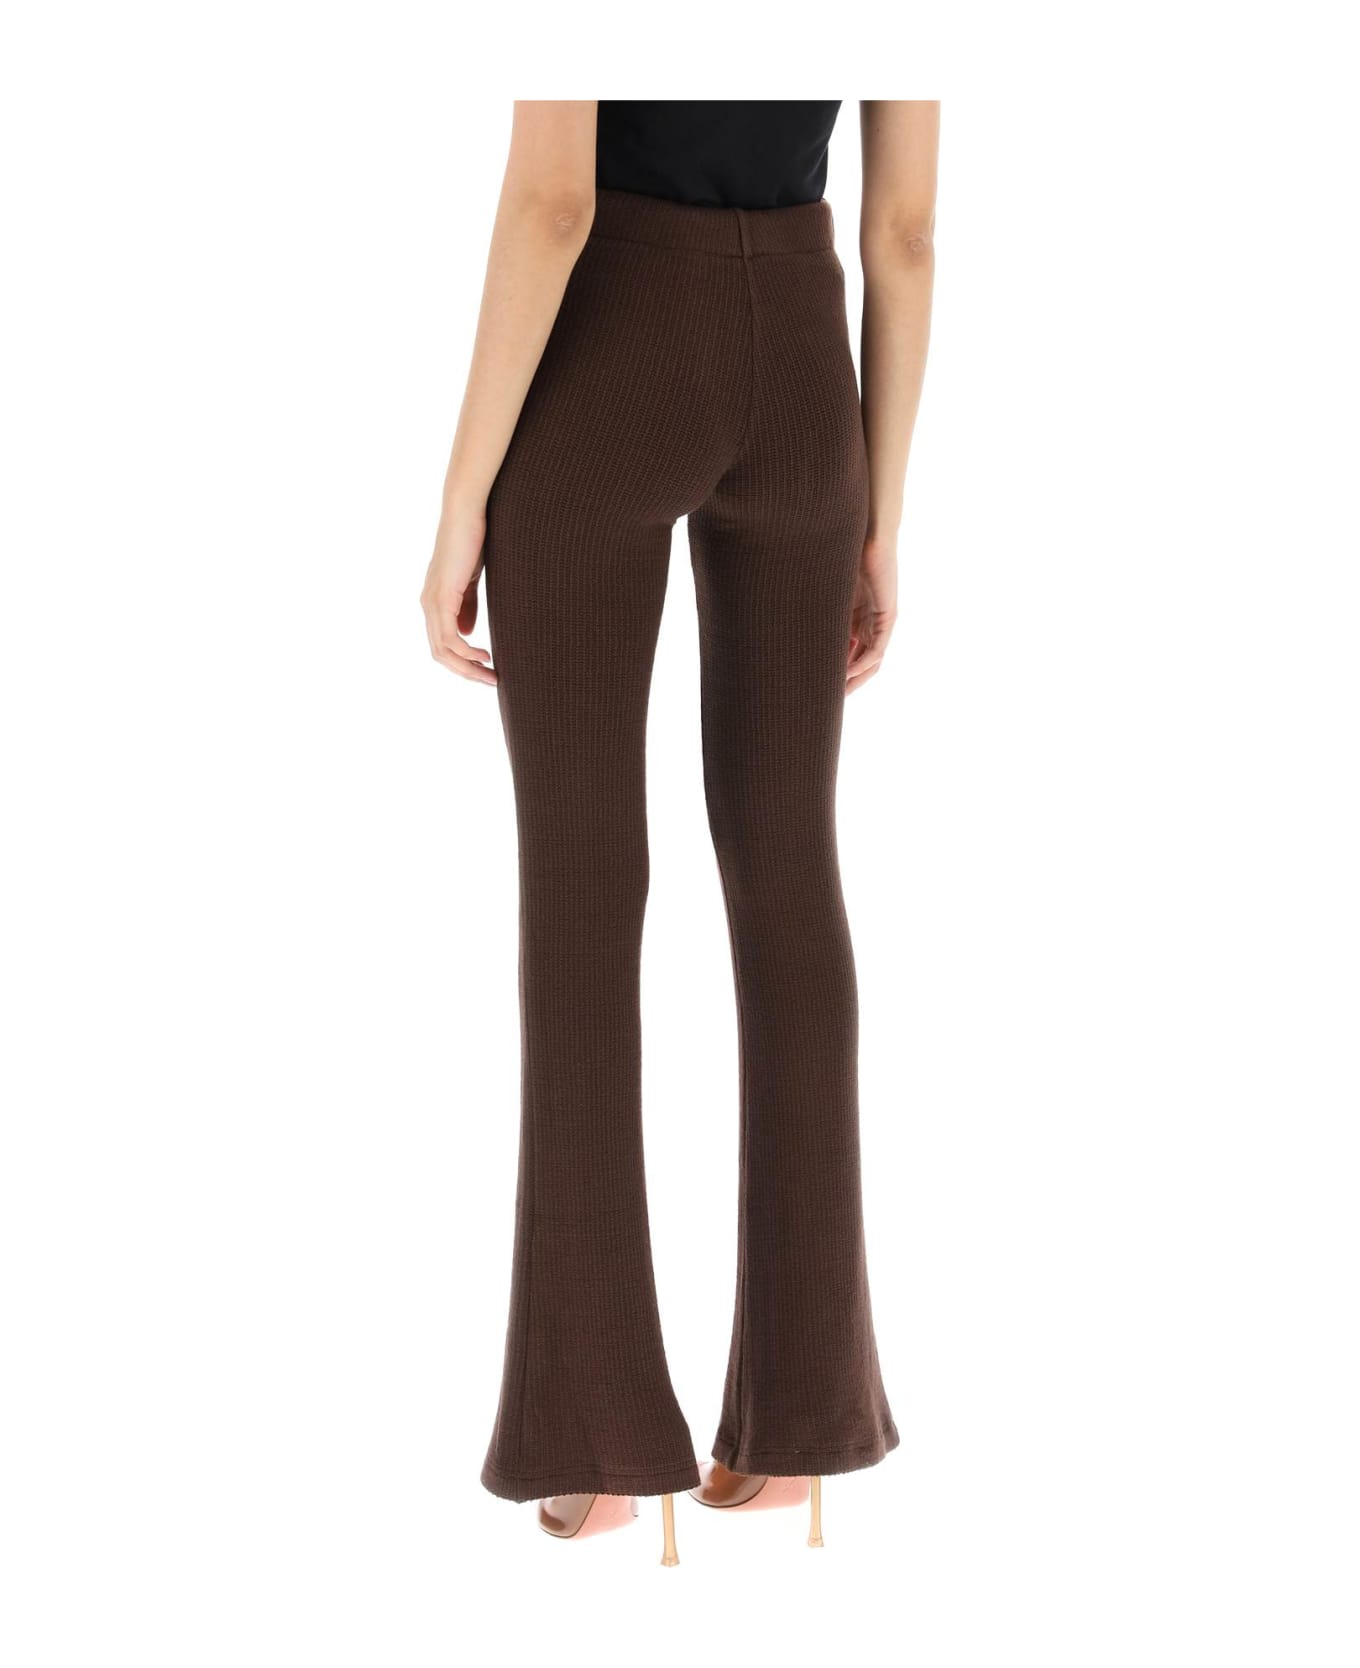 SIEDRES 'flo' Knitted Pants - BROWN (Brown) ボトムス